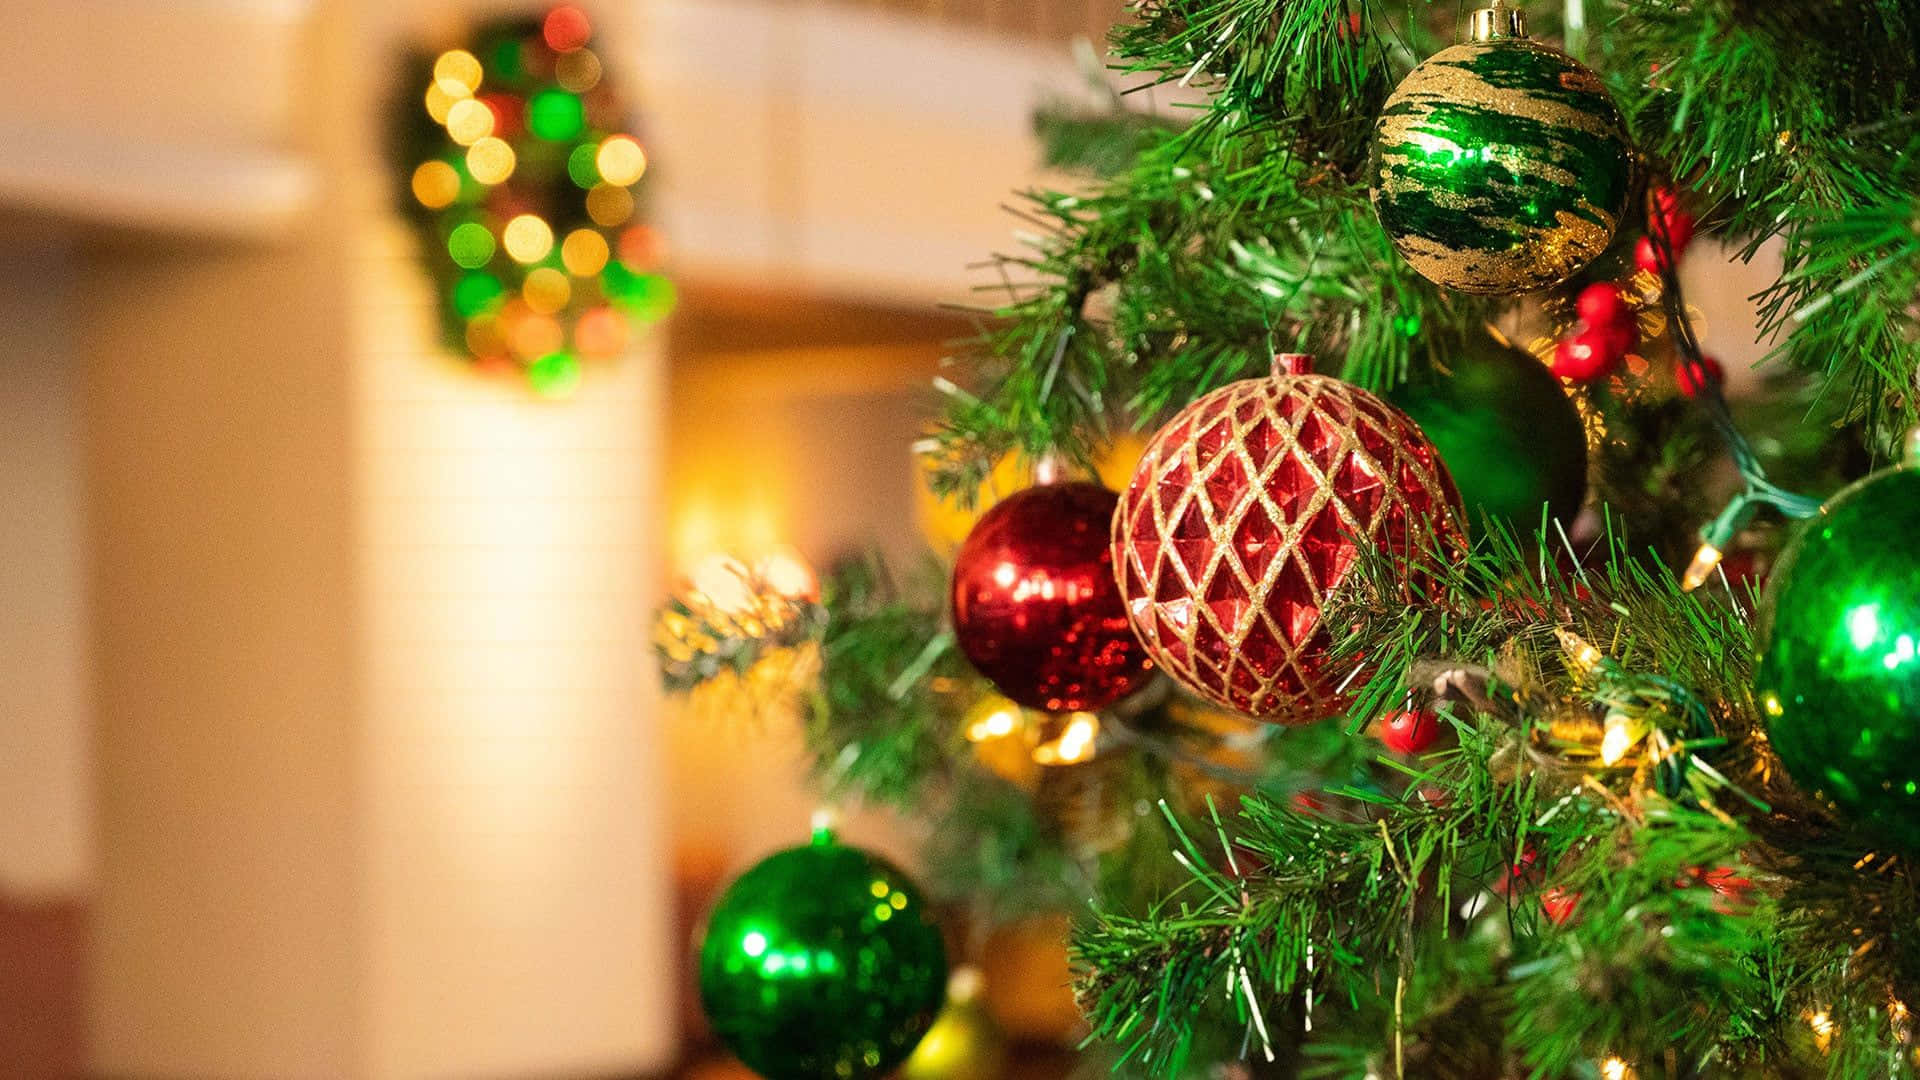 A Christmas Tree Decorated With Ornaments And Lights Wallpaper